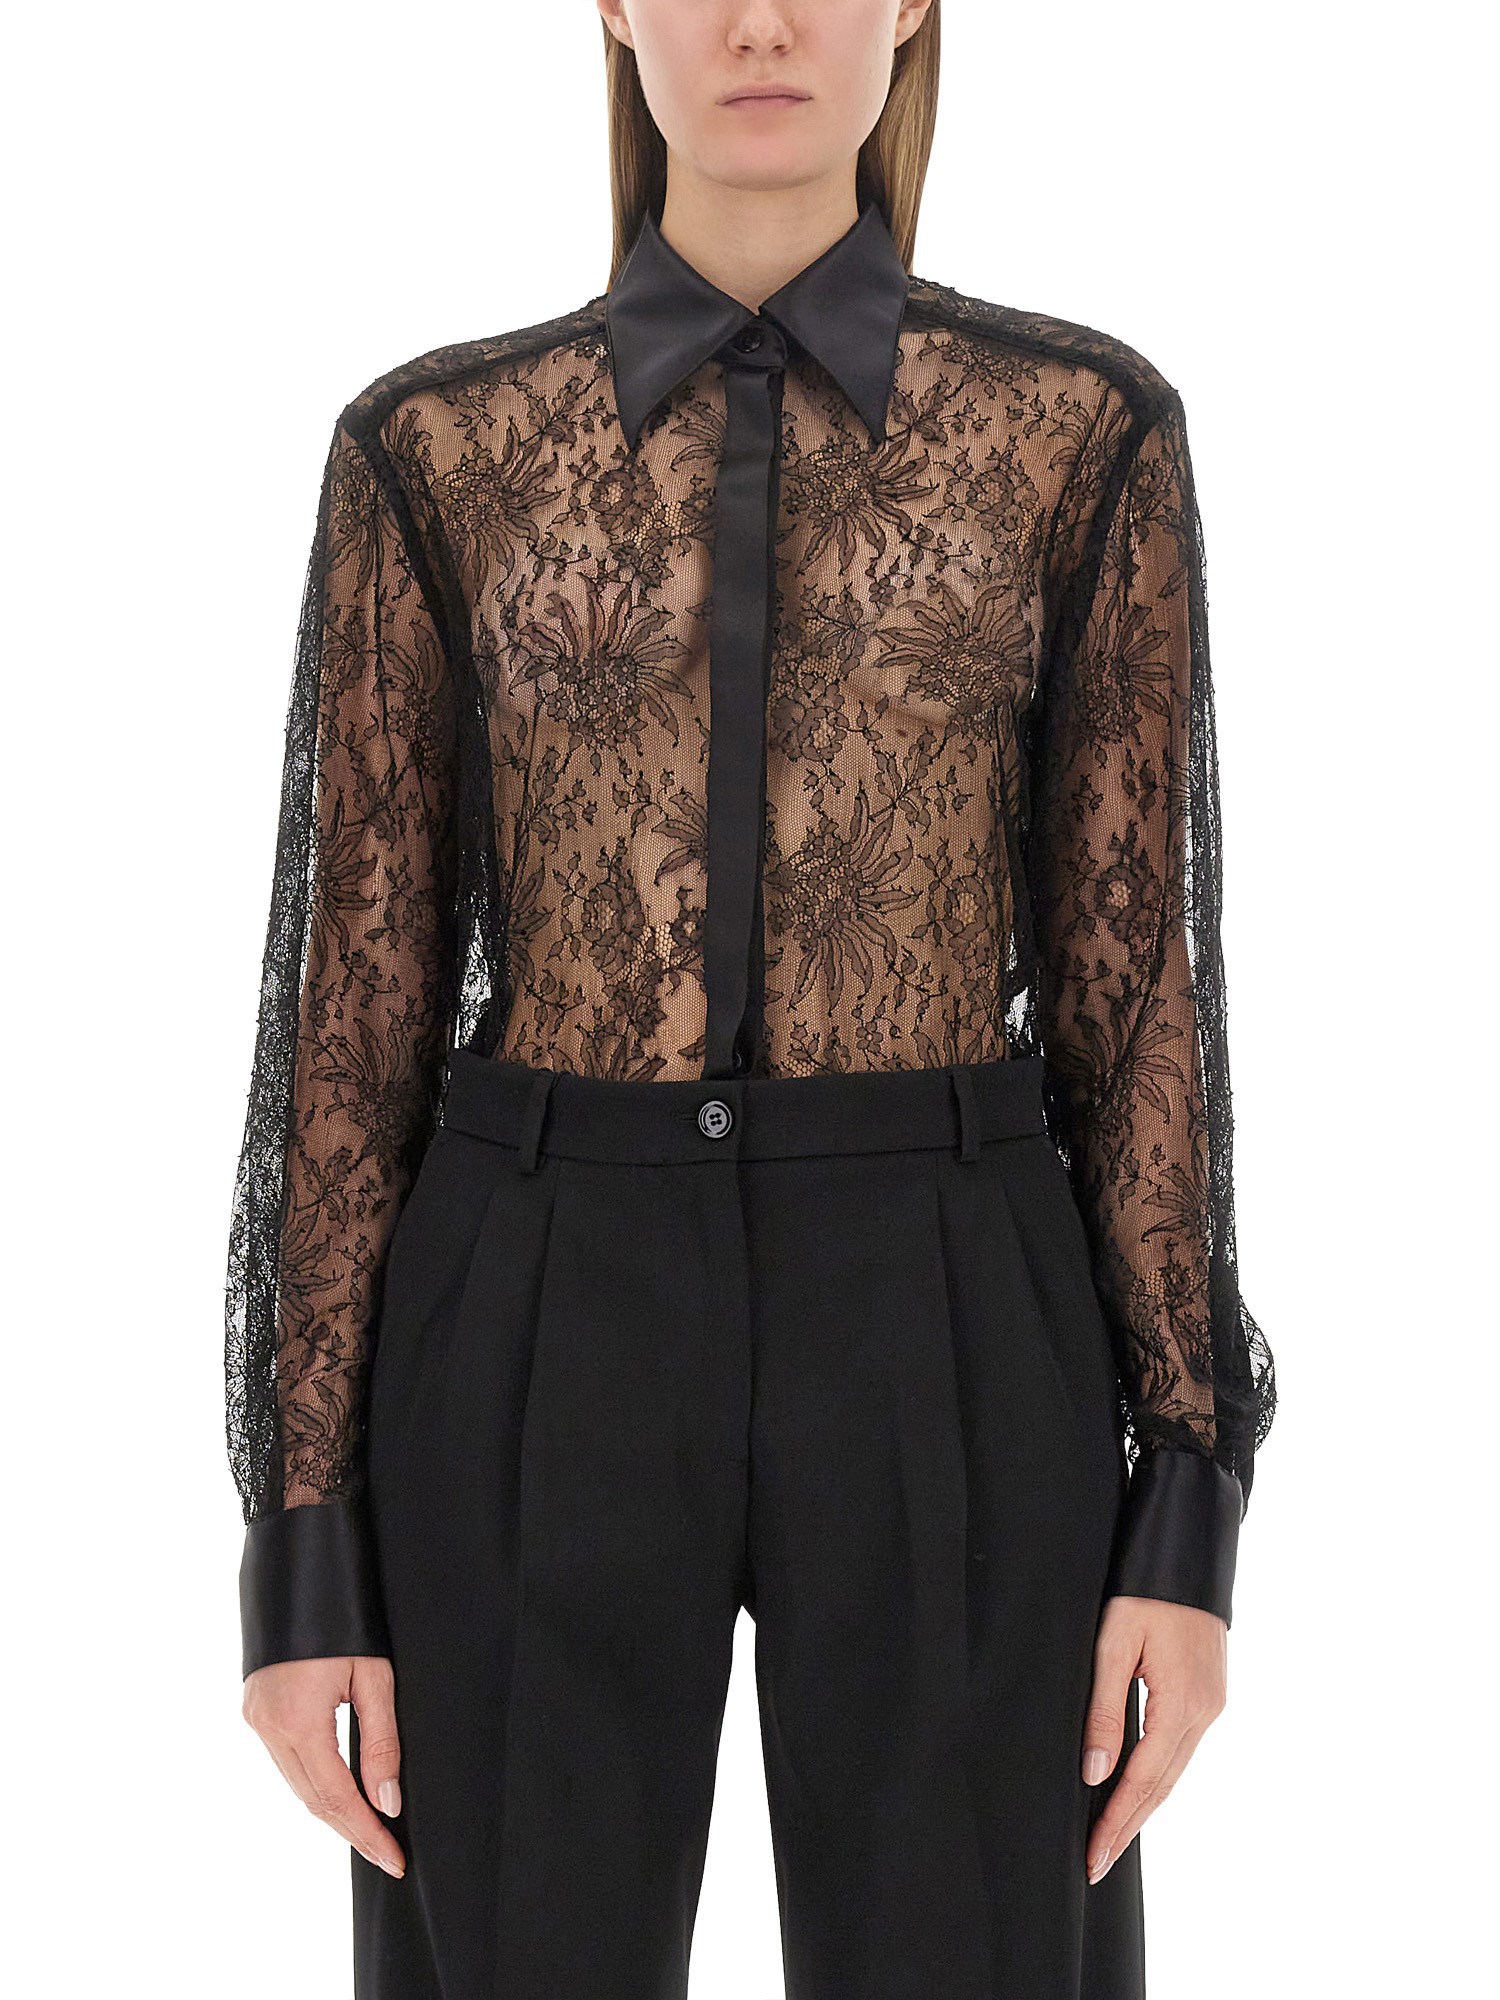 Floral Chantilly lace top in black - Dolce Gabbana